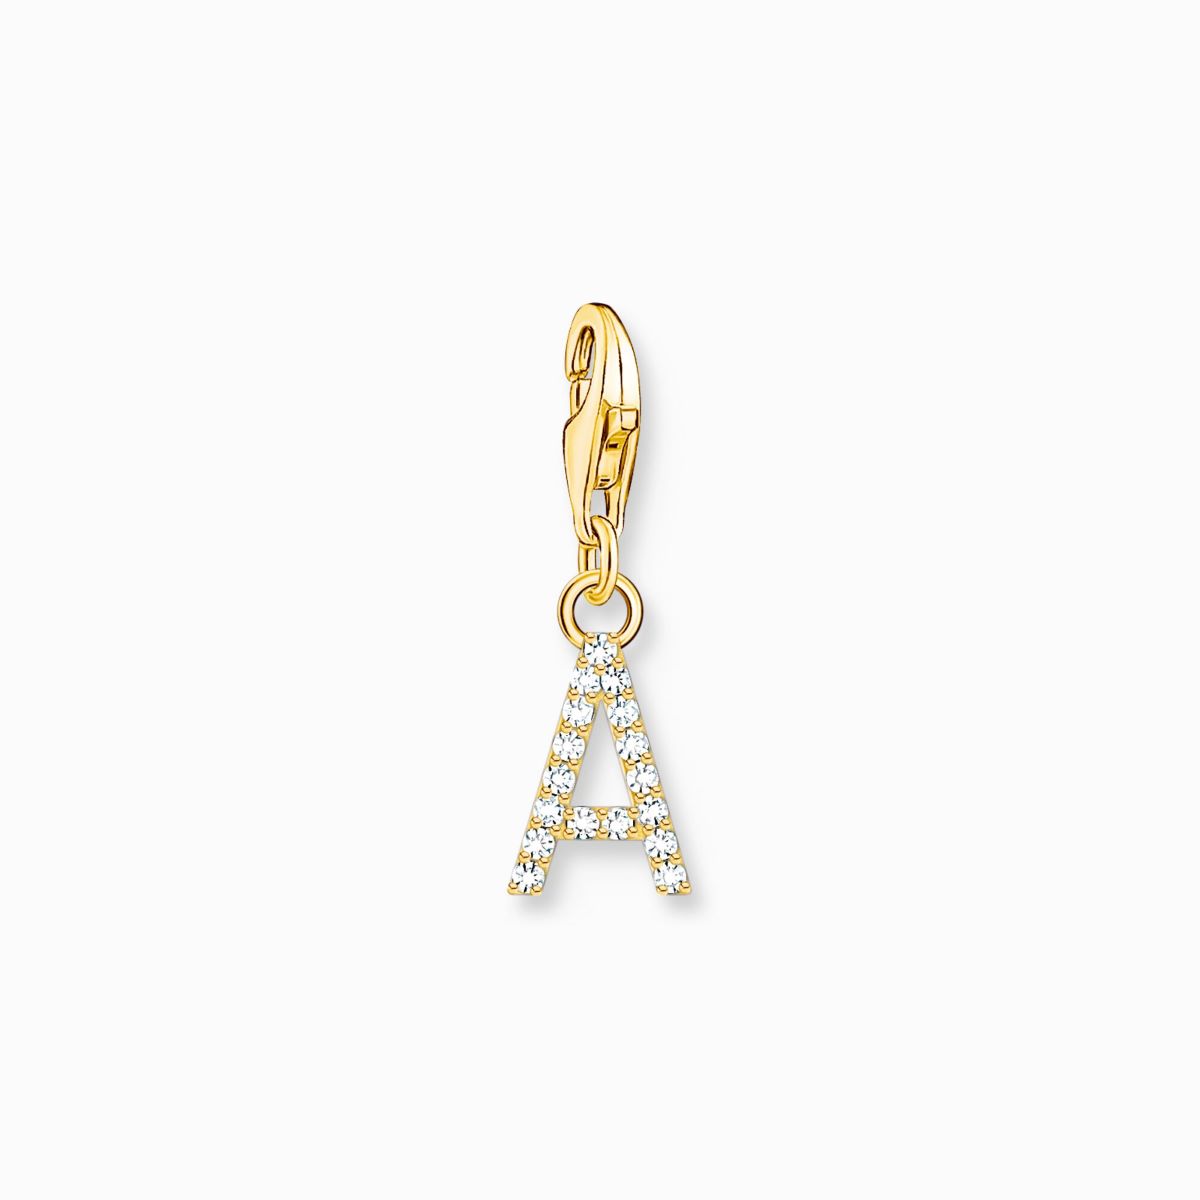 Photos - Other Jewellery Thomas Sabo Letter A Charm Pendant - Gold with White Zirconia 